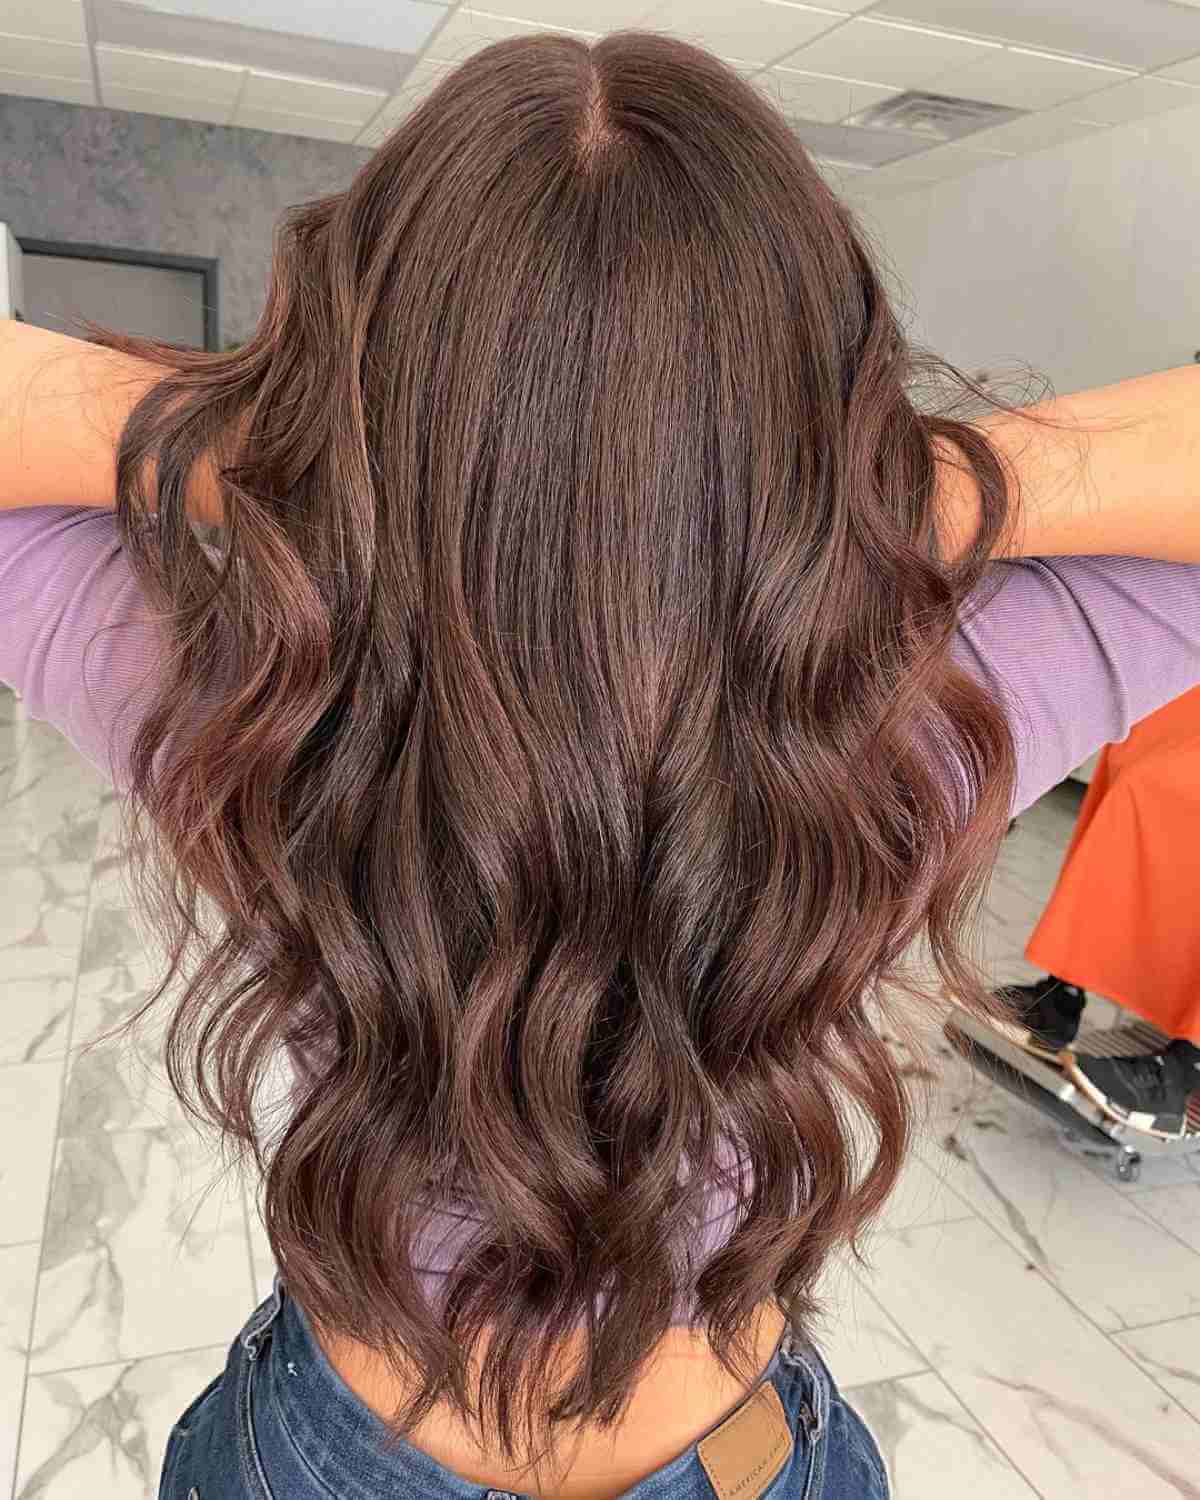 Long Chocolate Hair with Bouncy Waves